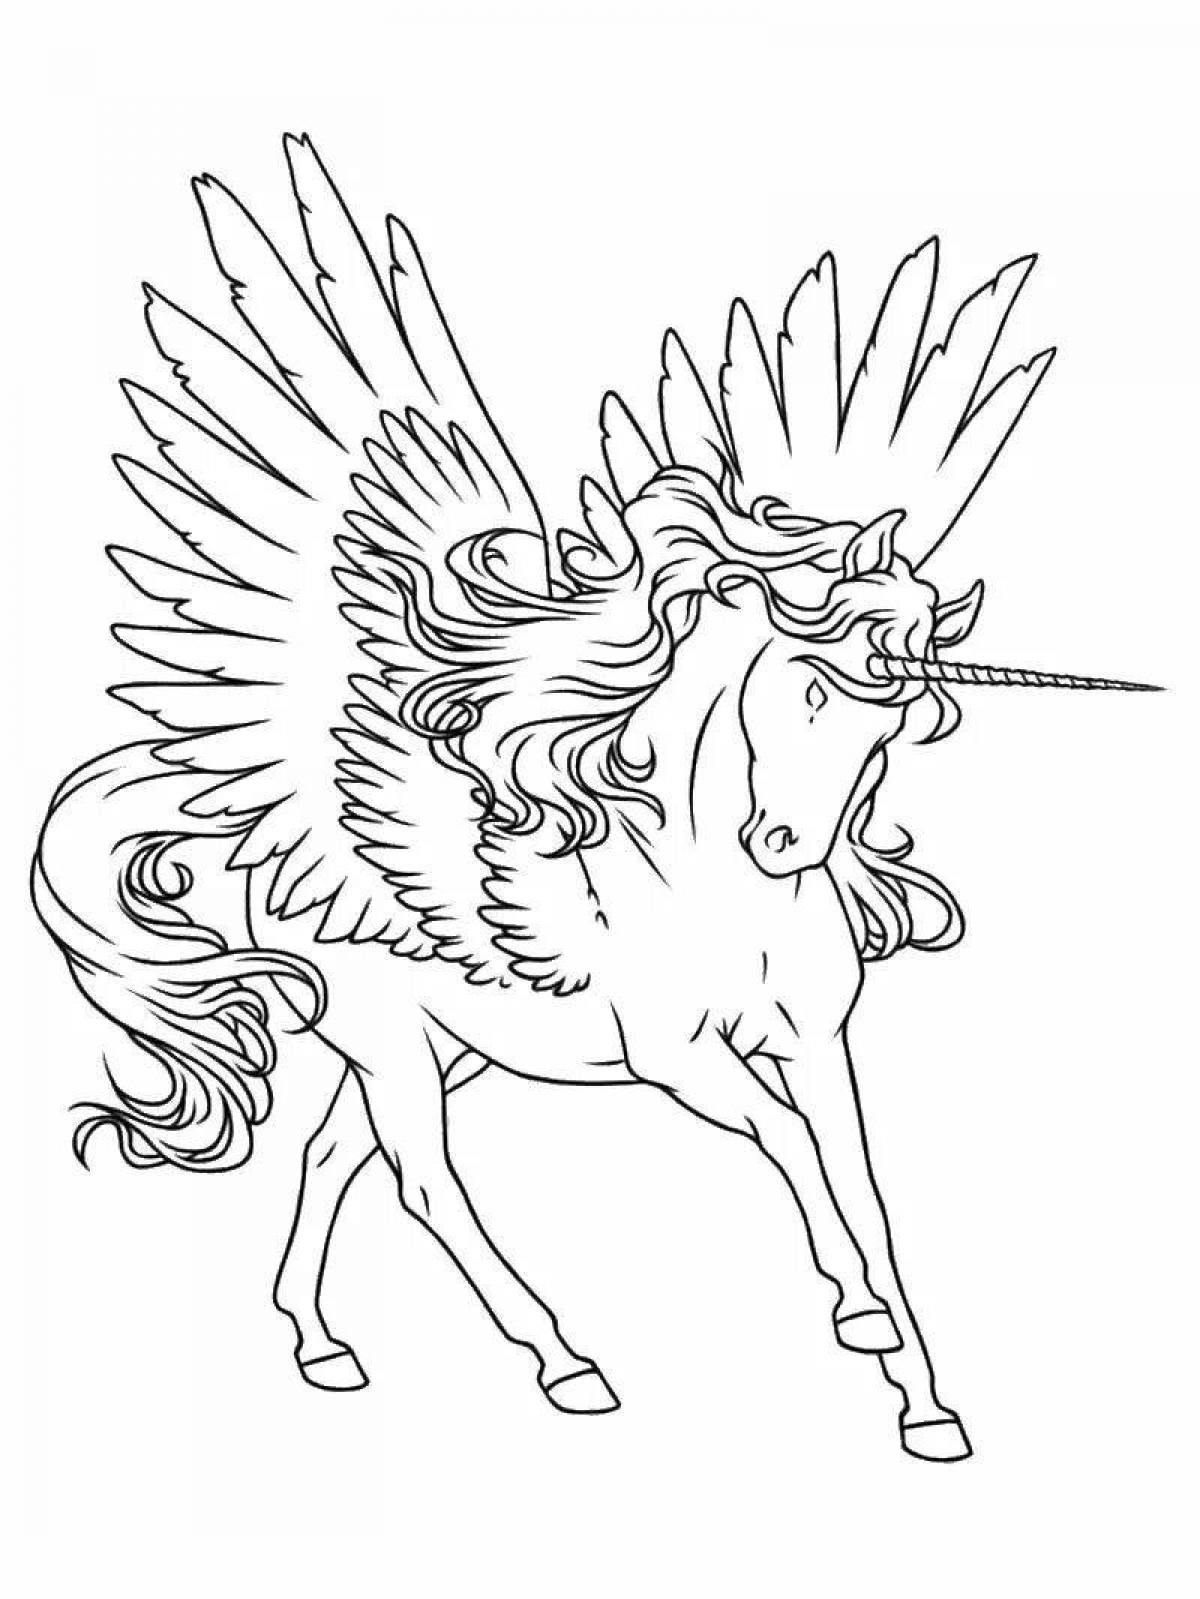 Adorable unicorn coloring book with wings